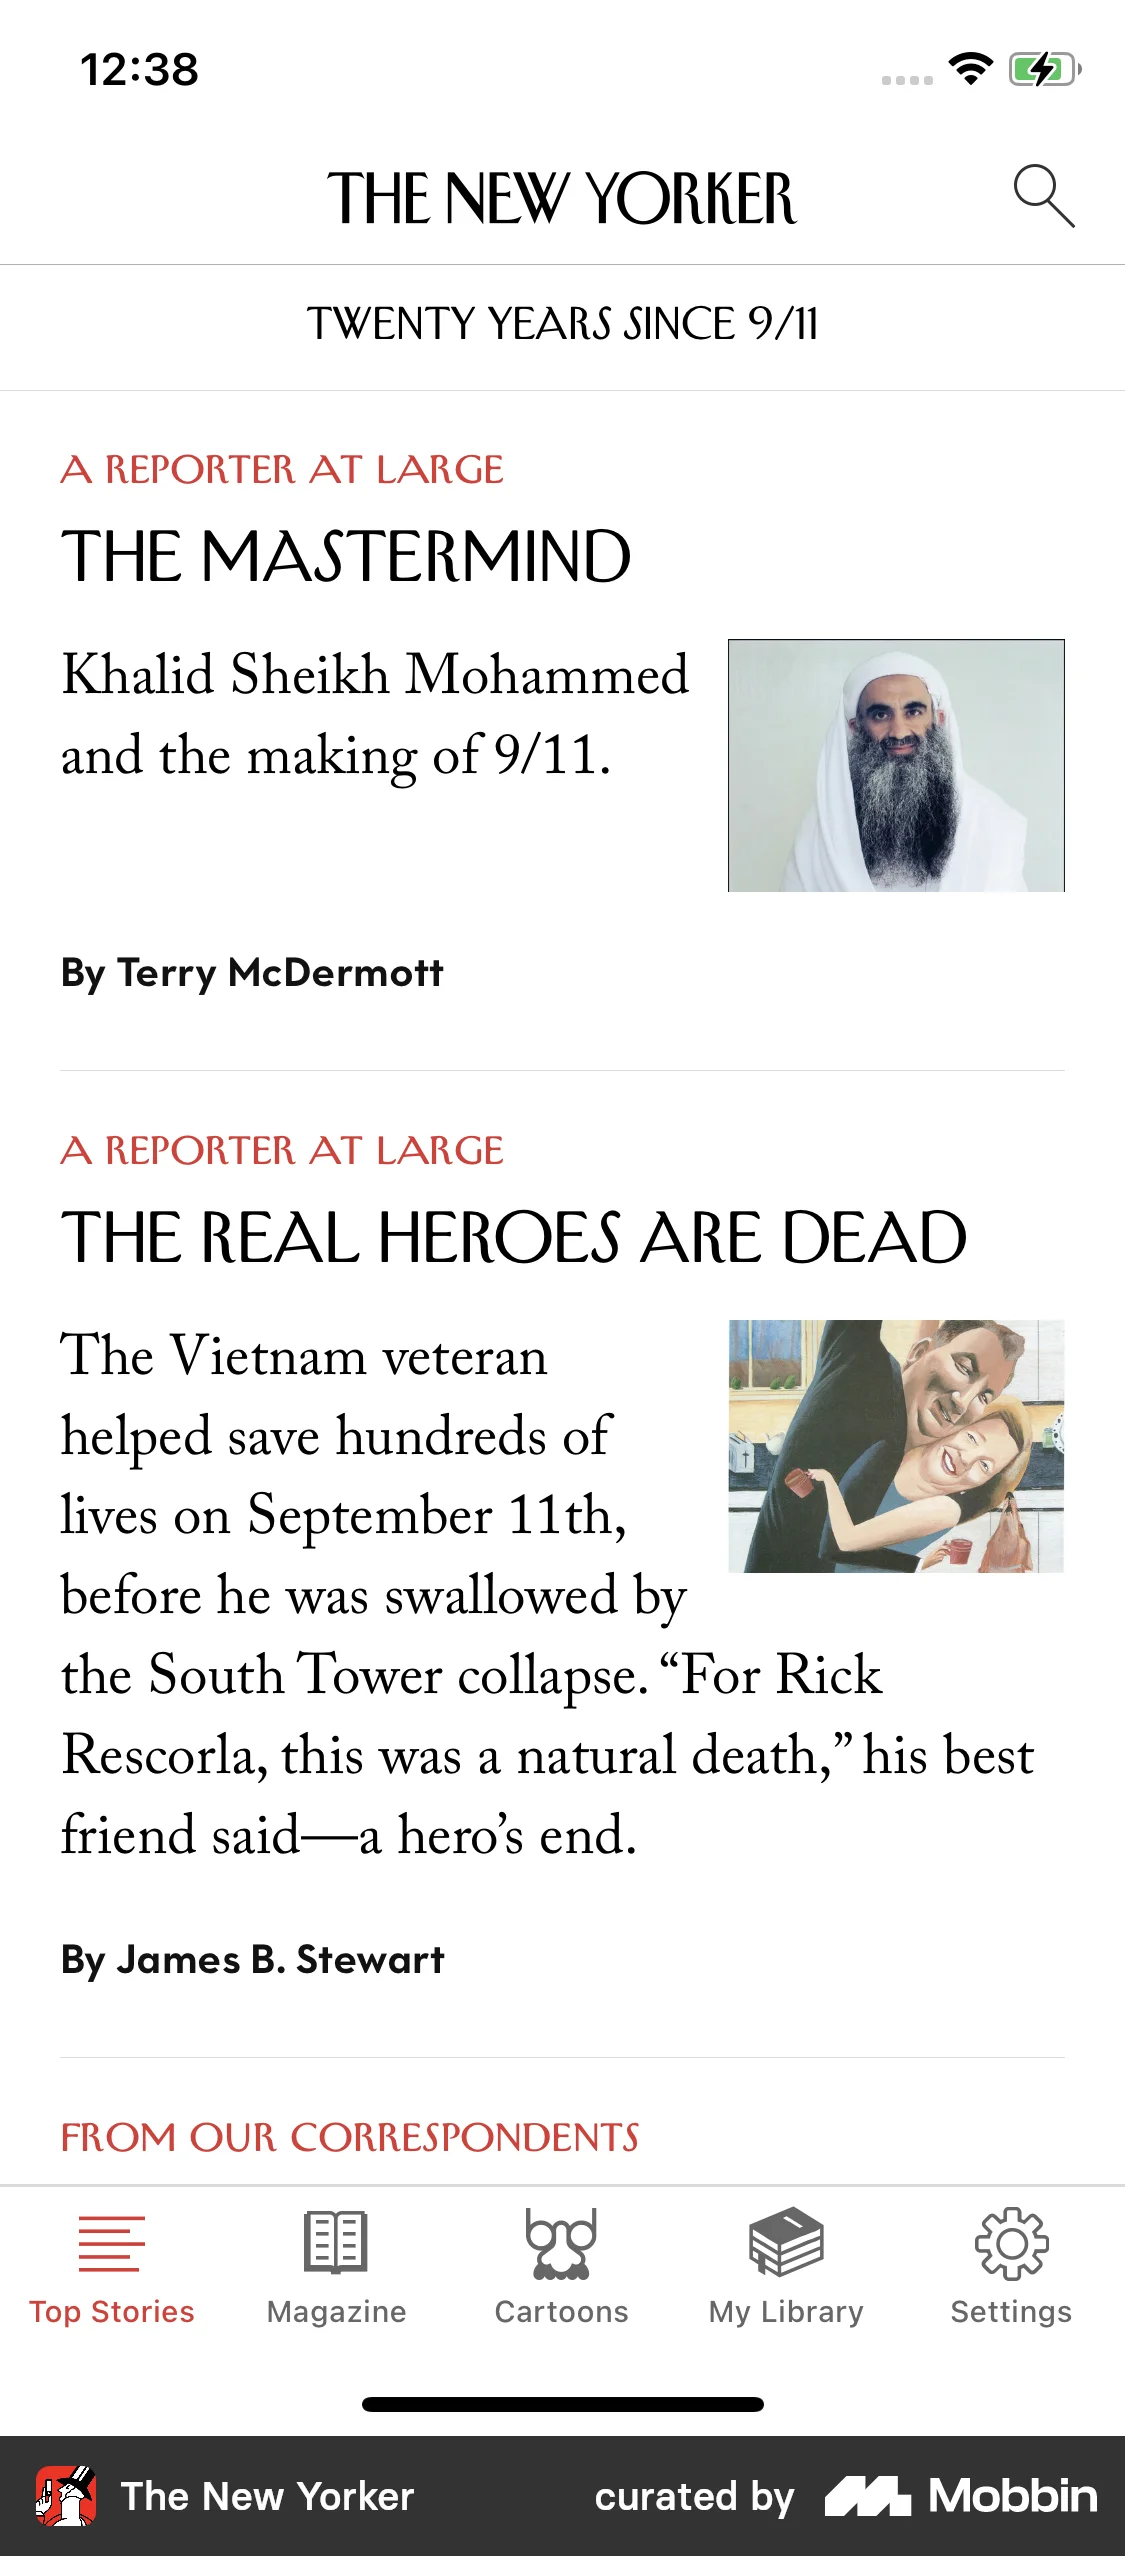 The New Yorker Top stories screen